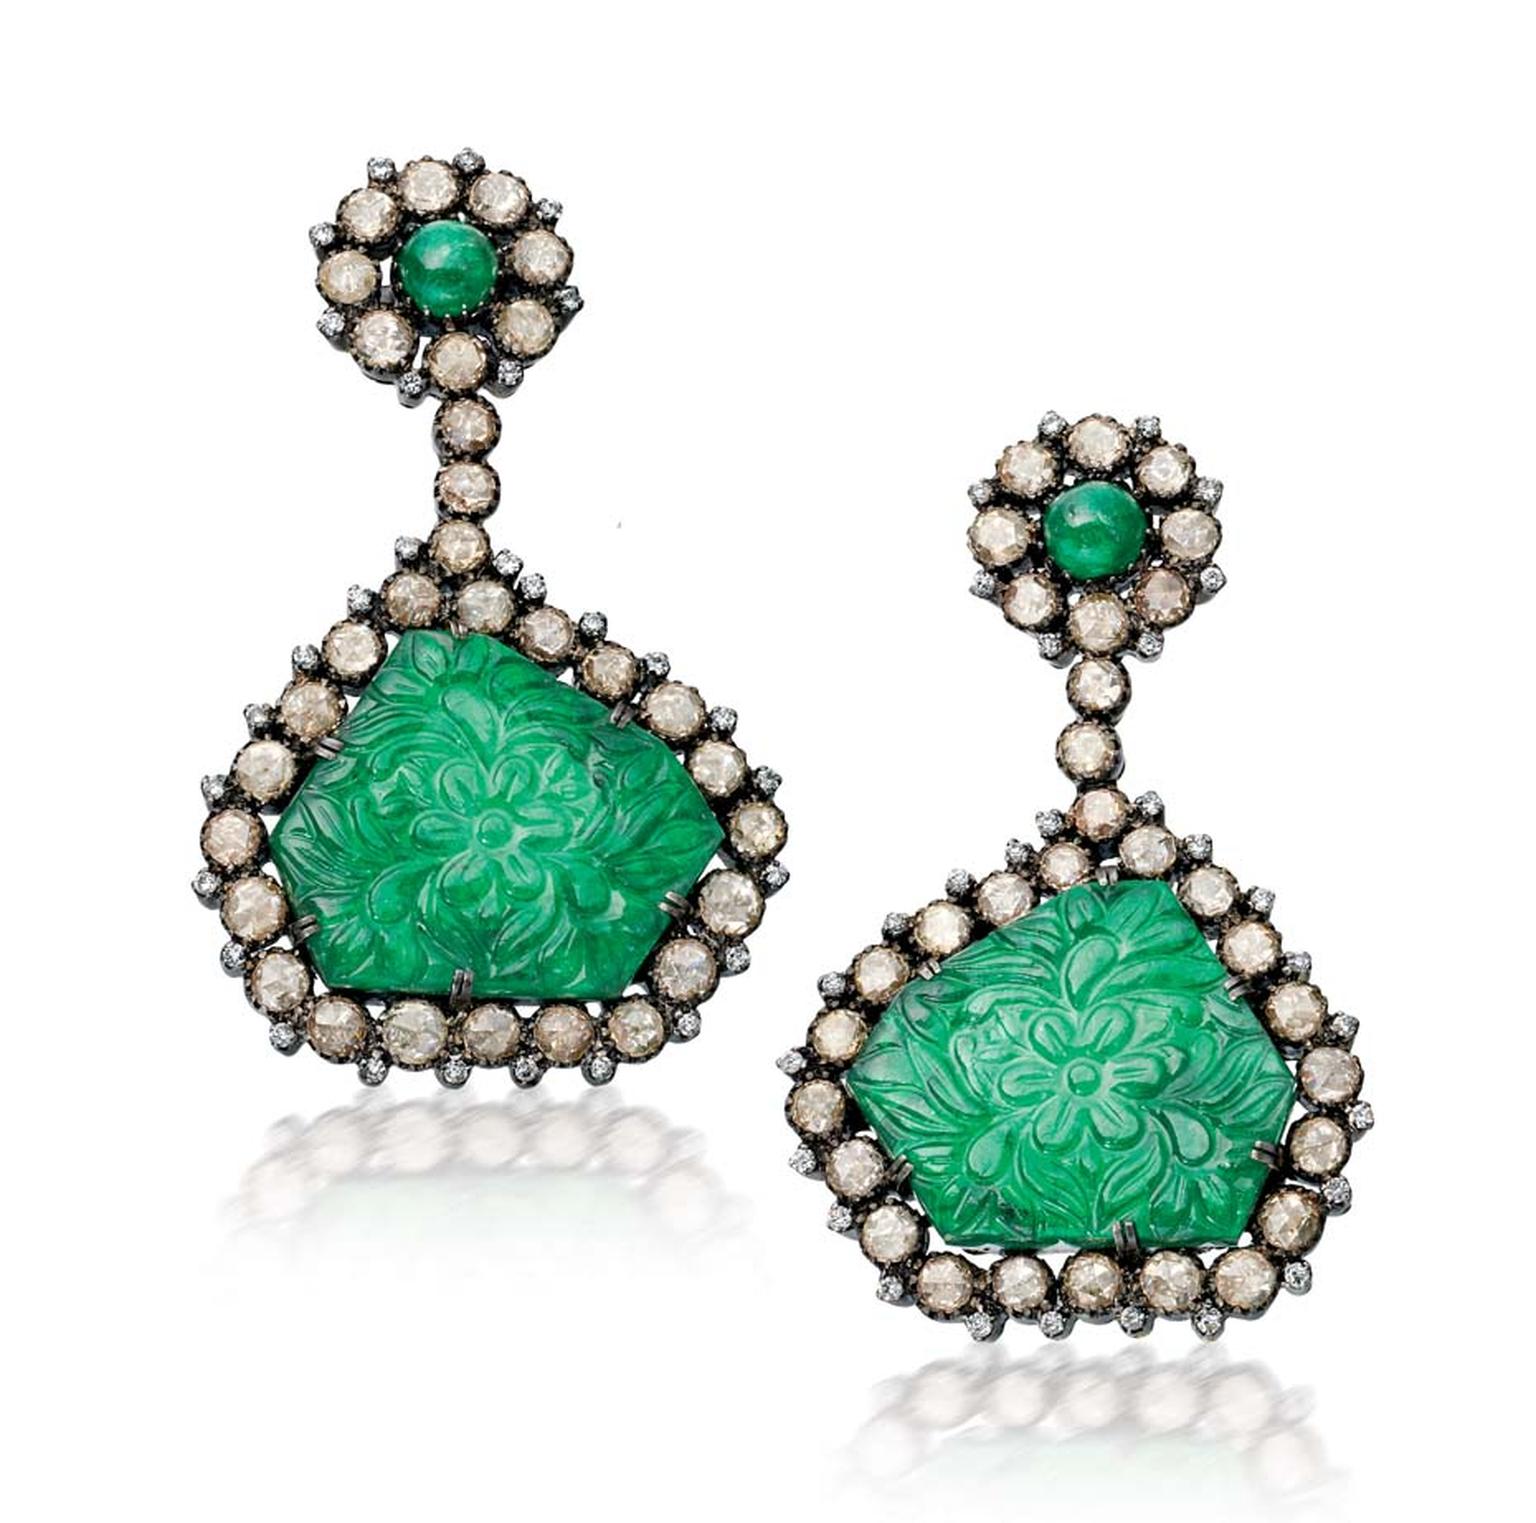 Amrapali Emerald earrings with floral carvings surrounded by diamonds.